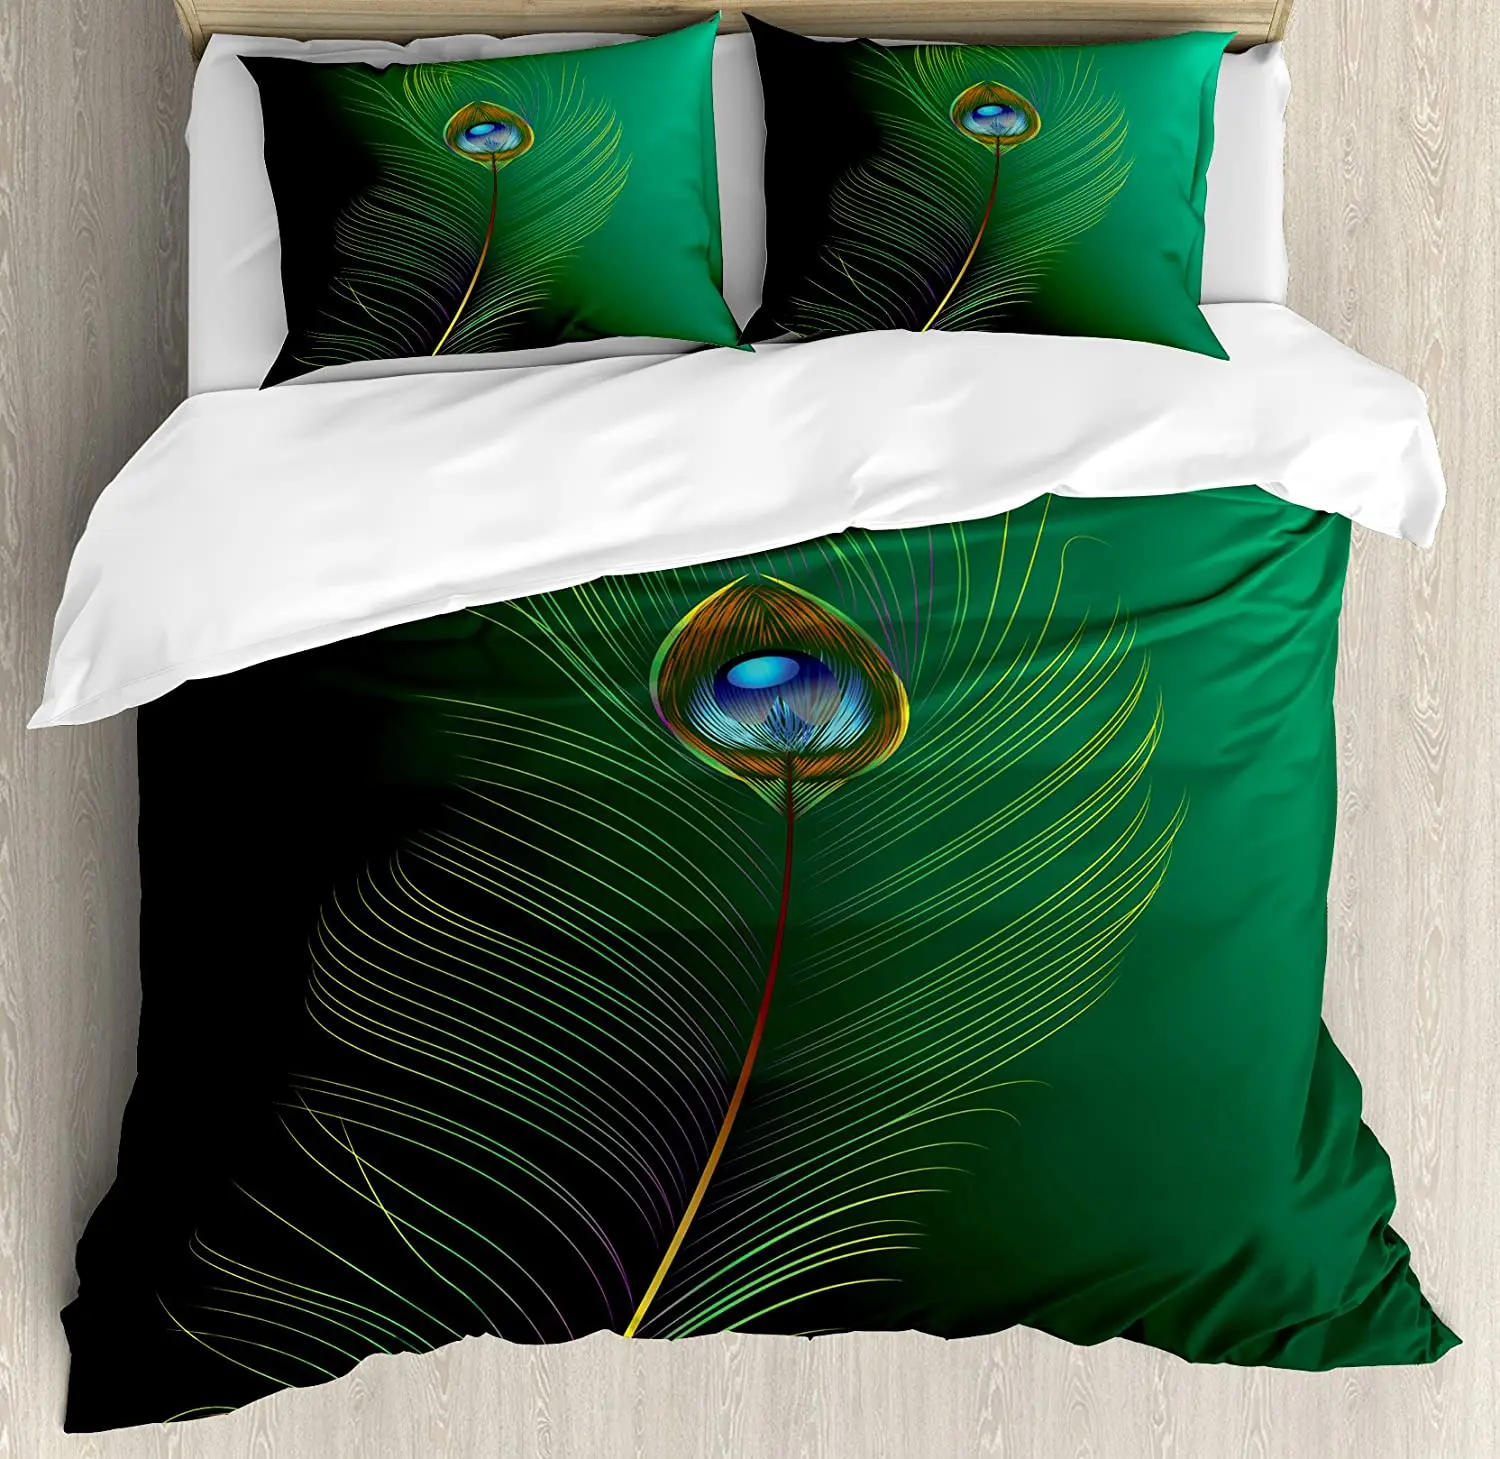 

Peacock Bedding Set Comforter Duvet Cover Pillow Shams Peacock Feather Illustration in Simplistic A Bedding Cover Double Bed Set